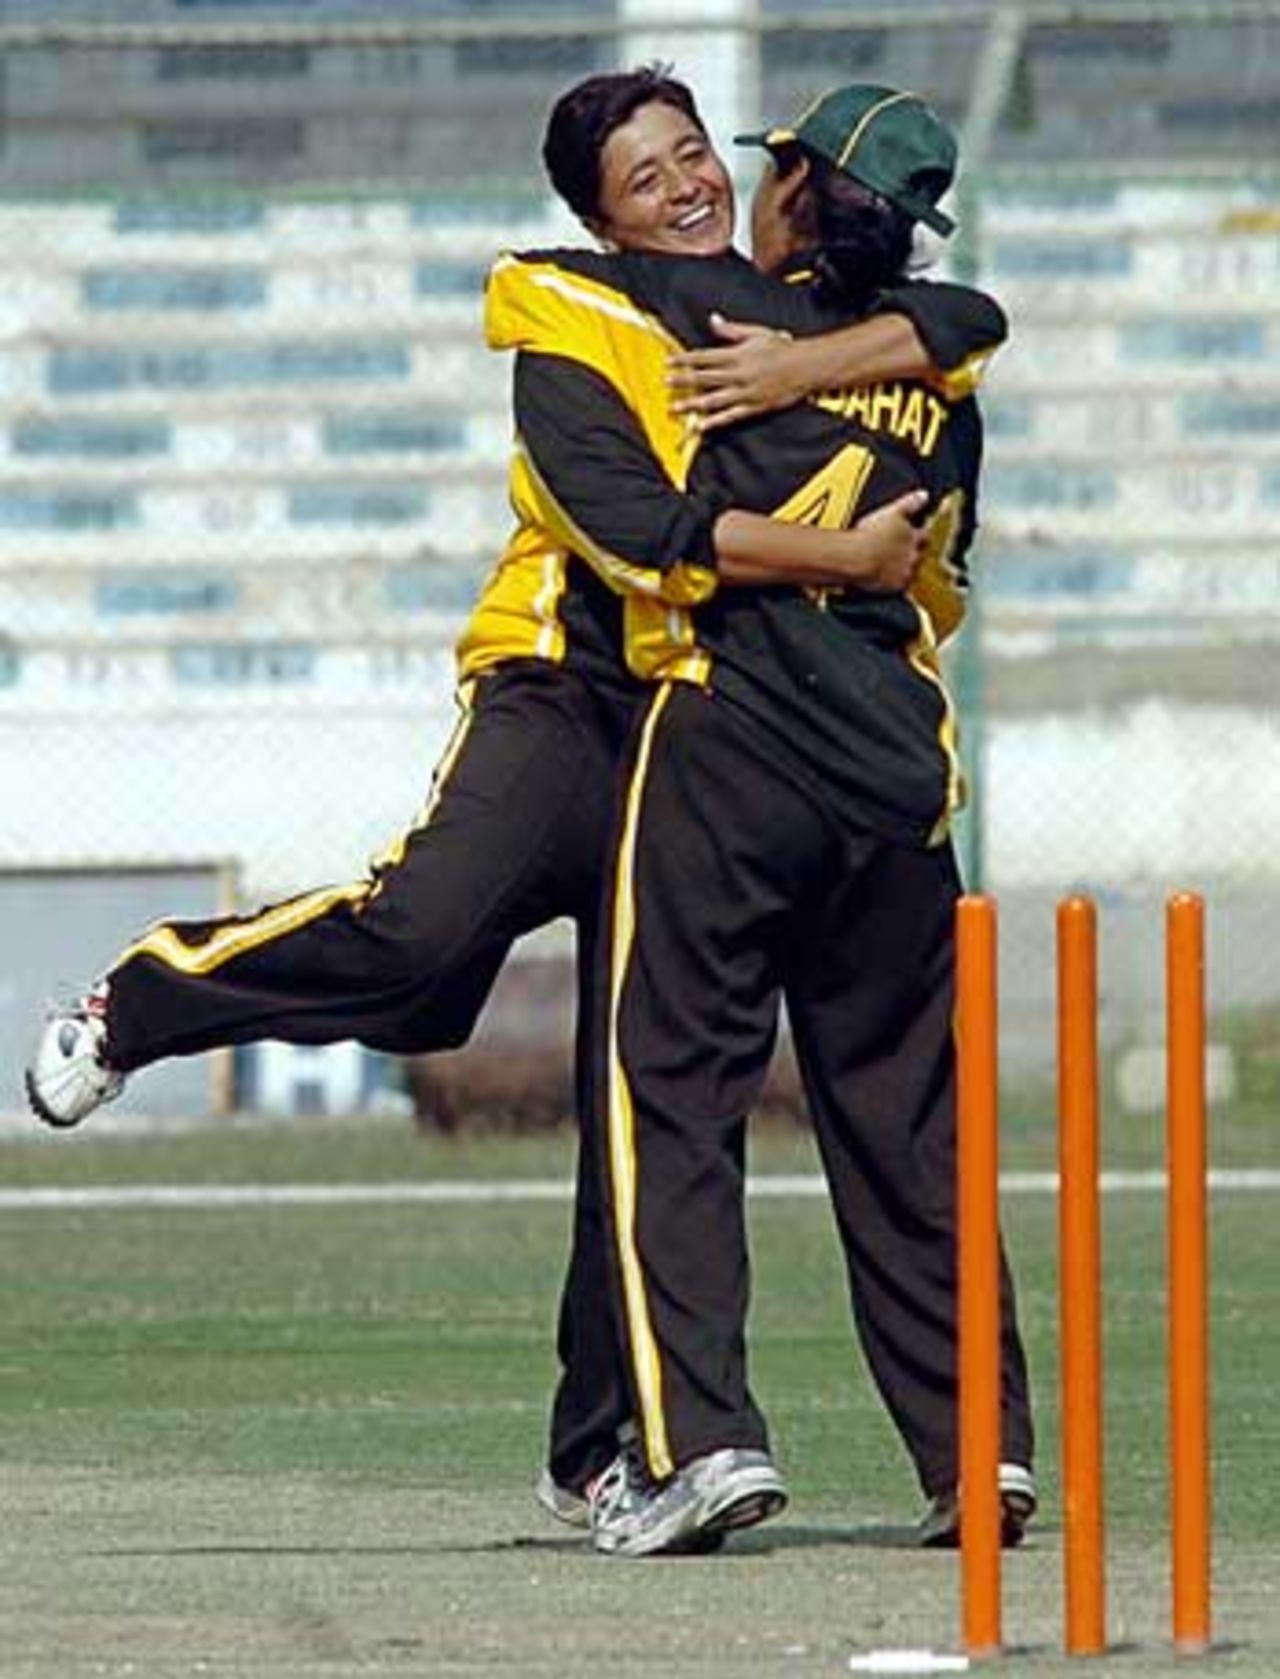 Pakistan celebrated a wicket as Sri Lanka struggle to 123 all out in the Asia Cup, but it was still enough to beat Pakistan by 30 runs, Pakistan Women v Sri Lanka Women, 4th Asia Cup match, Karachi, December 31, 2005